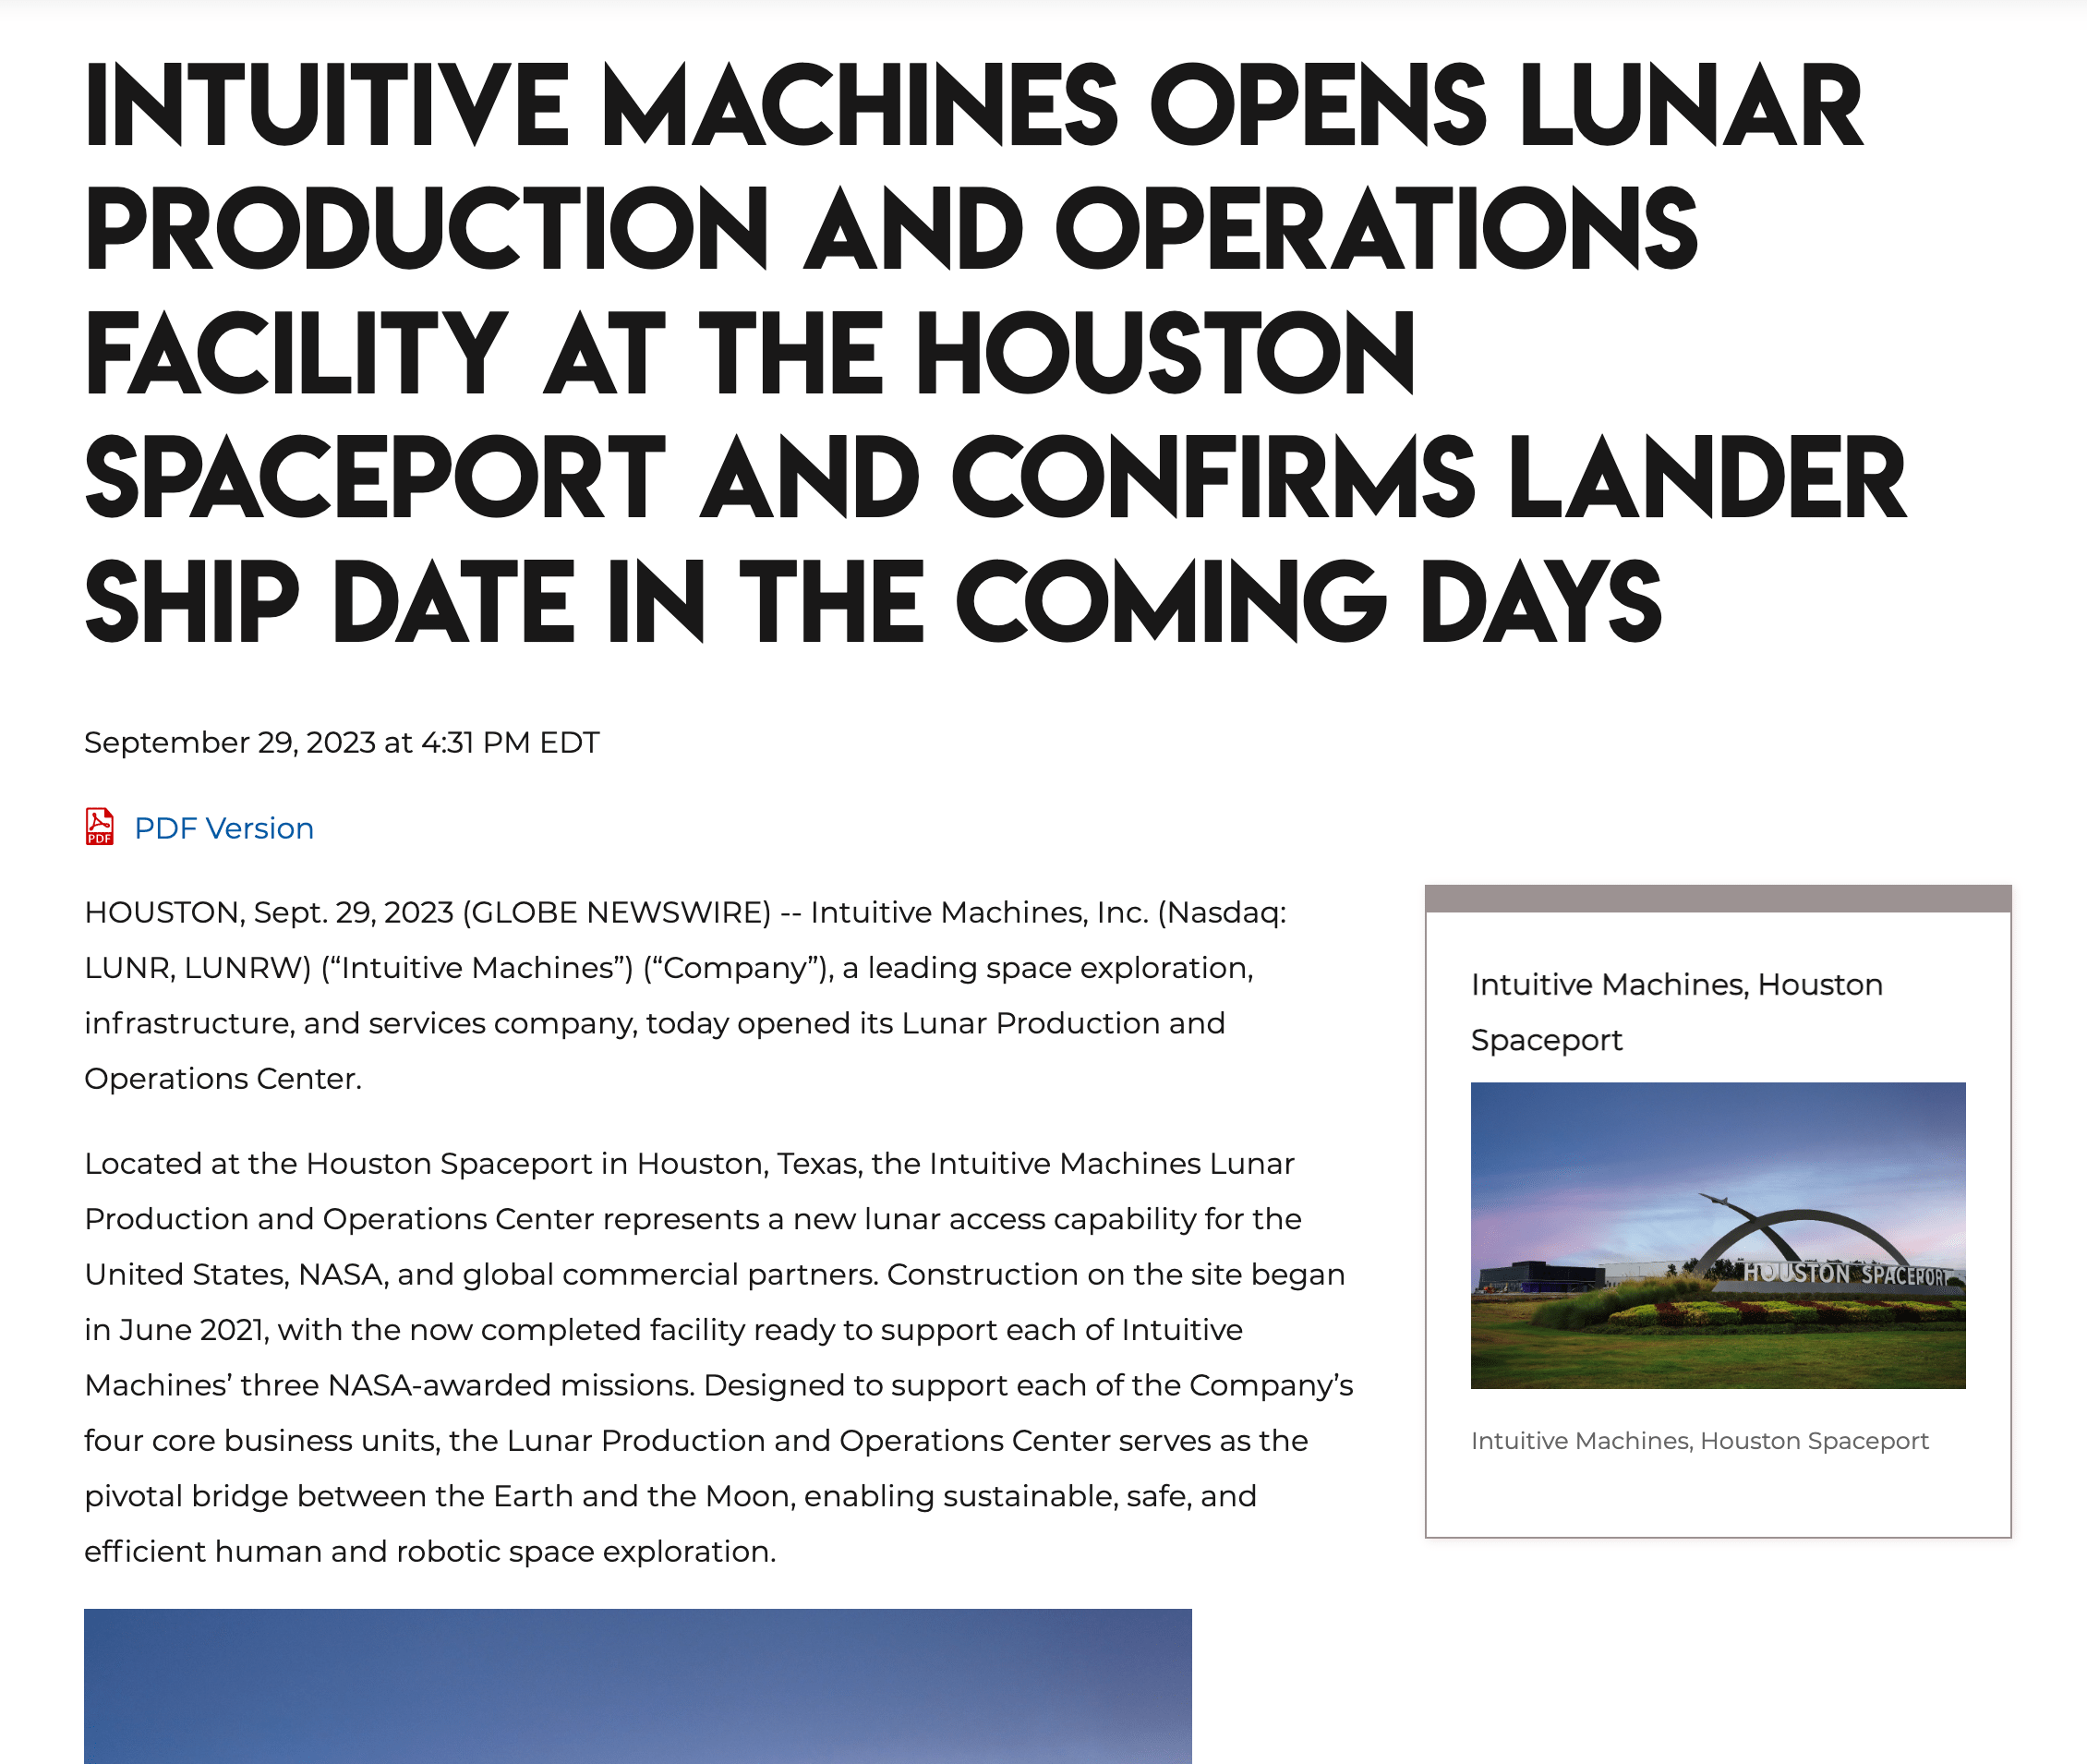 Intuitive Machines Opens Lunar Production and Operations Facility at the Houston Spaceport